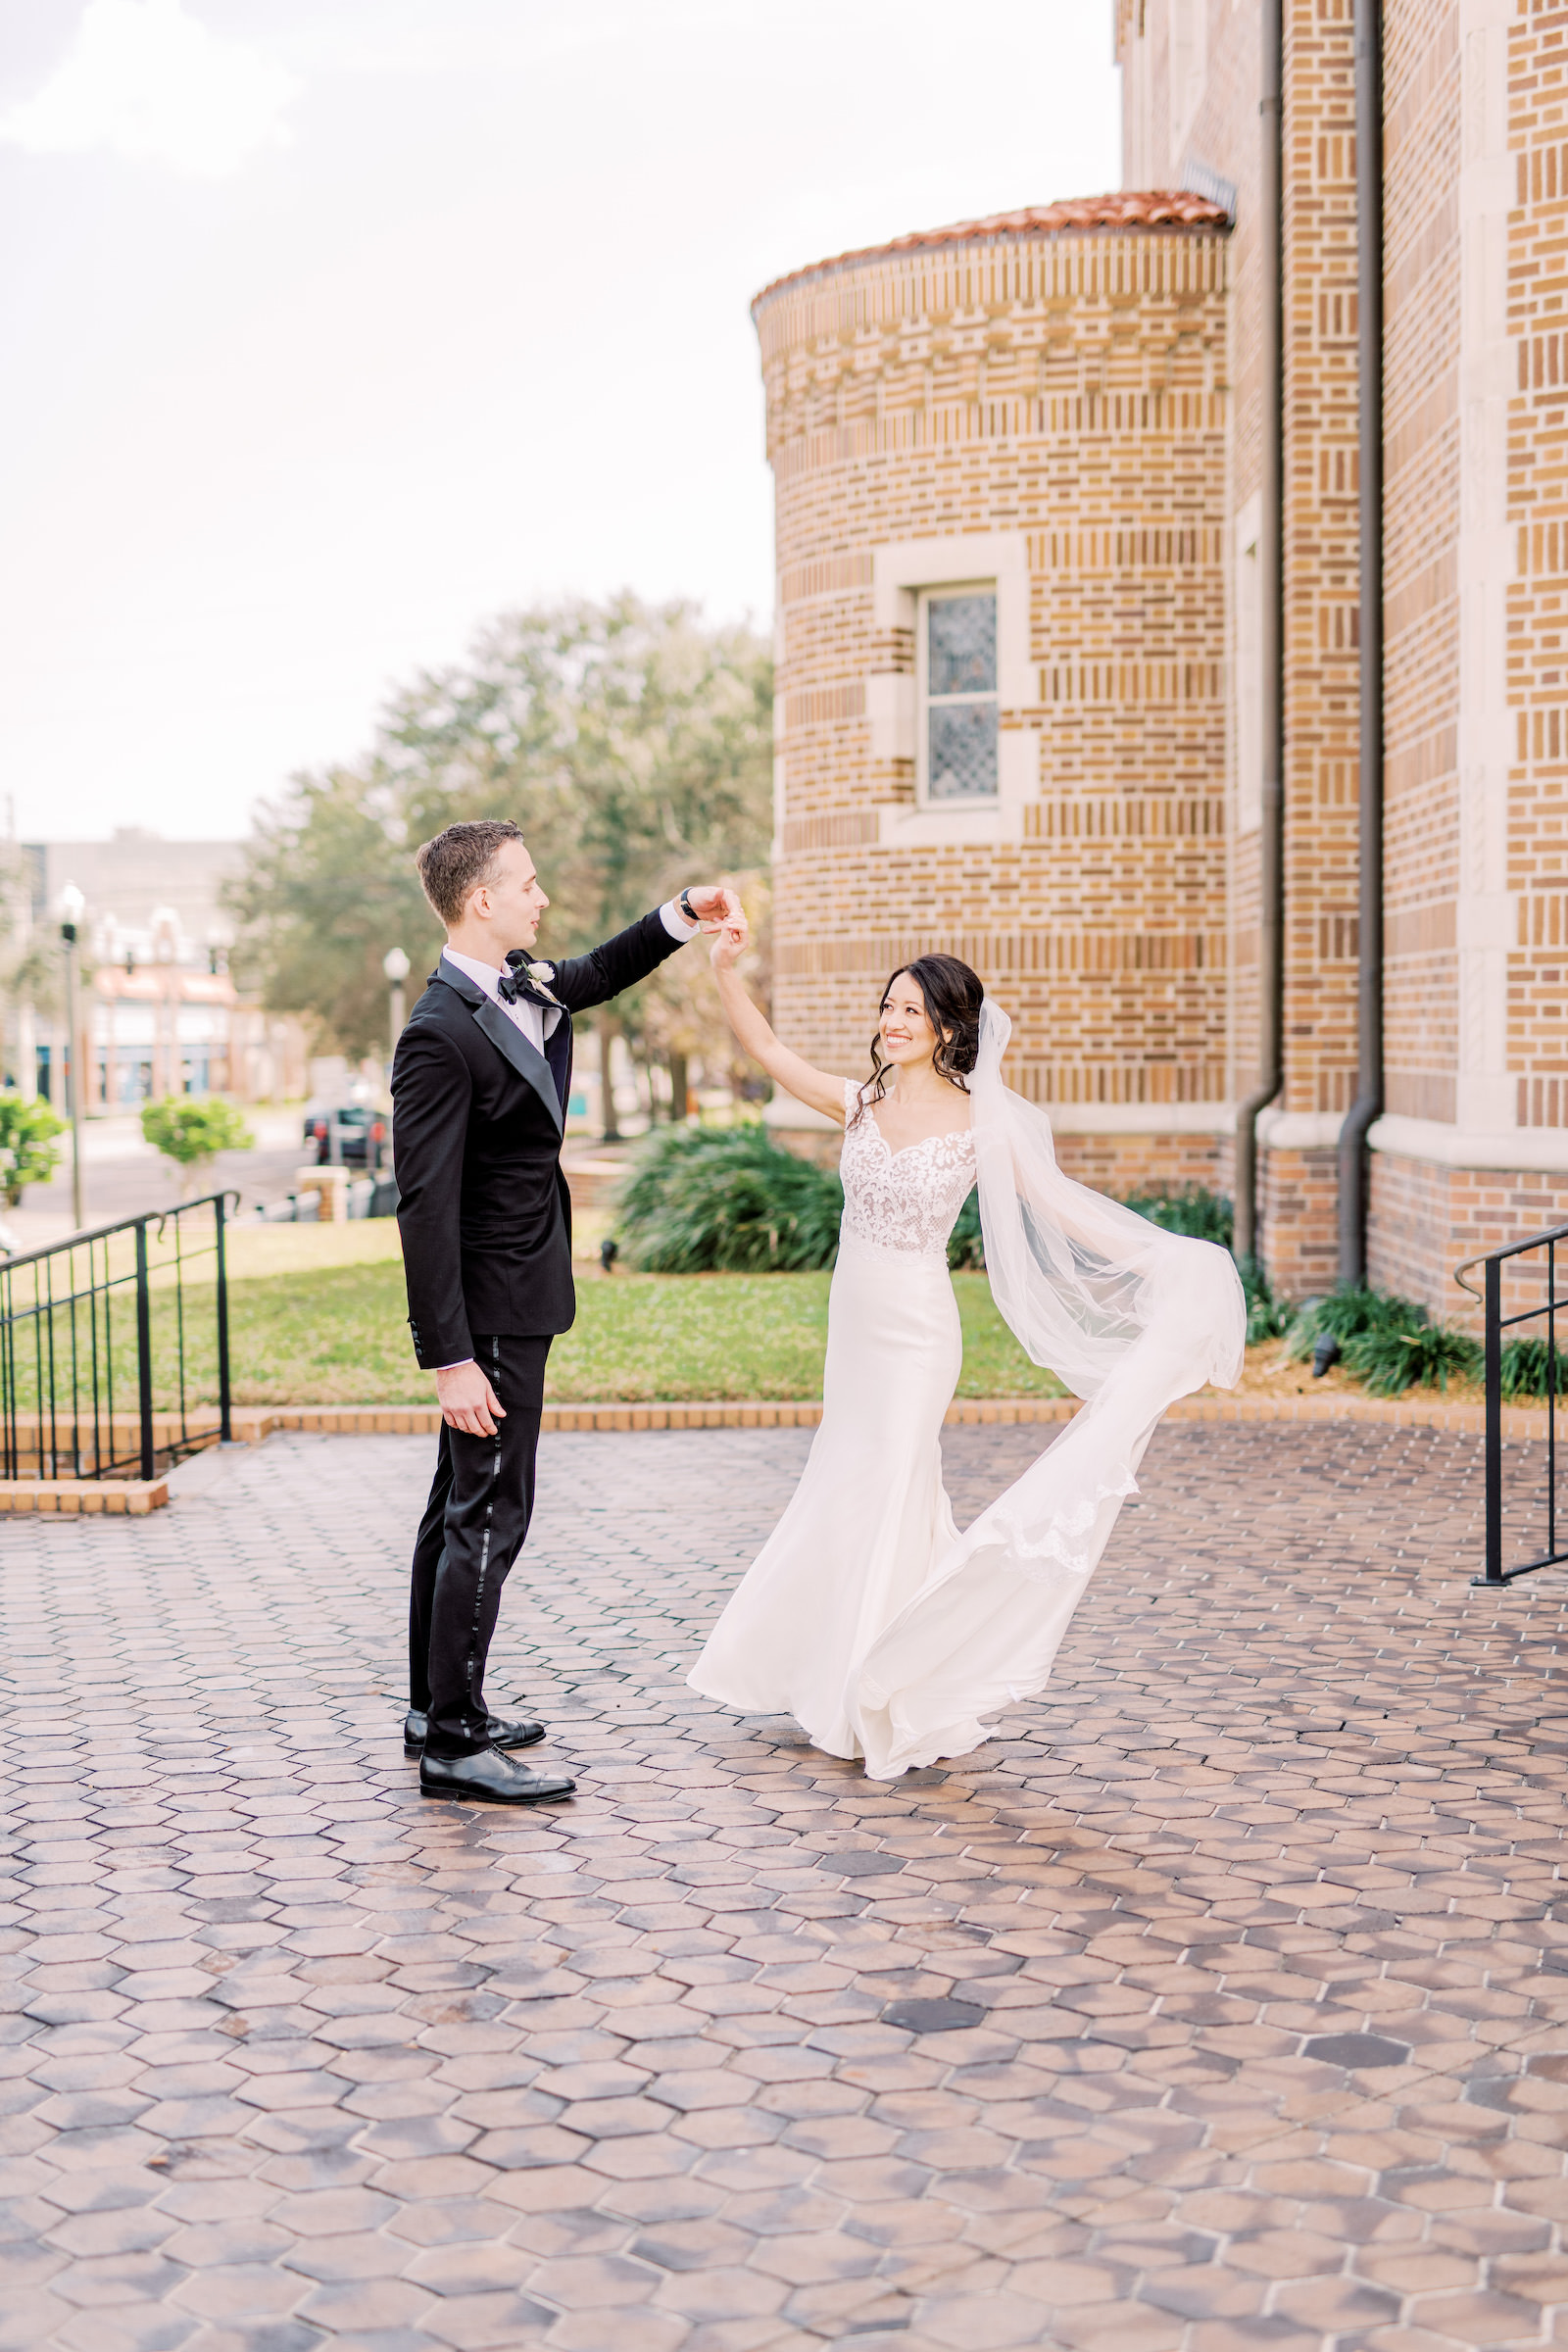 Florida Groom Spinning Bride Outside St. Pete Wedding Ceremony Venue St. Mary Our Lady of Grace Catholic Church | Tampa Bay Wedding Photographer Kera Photography